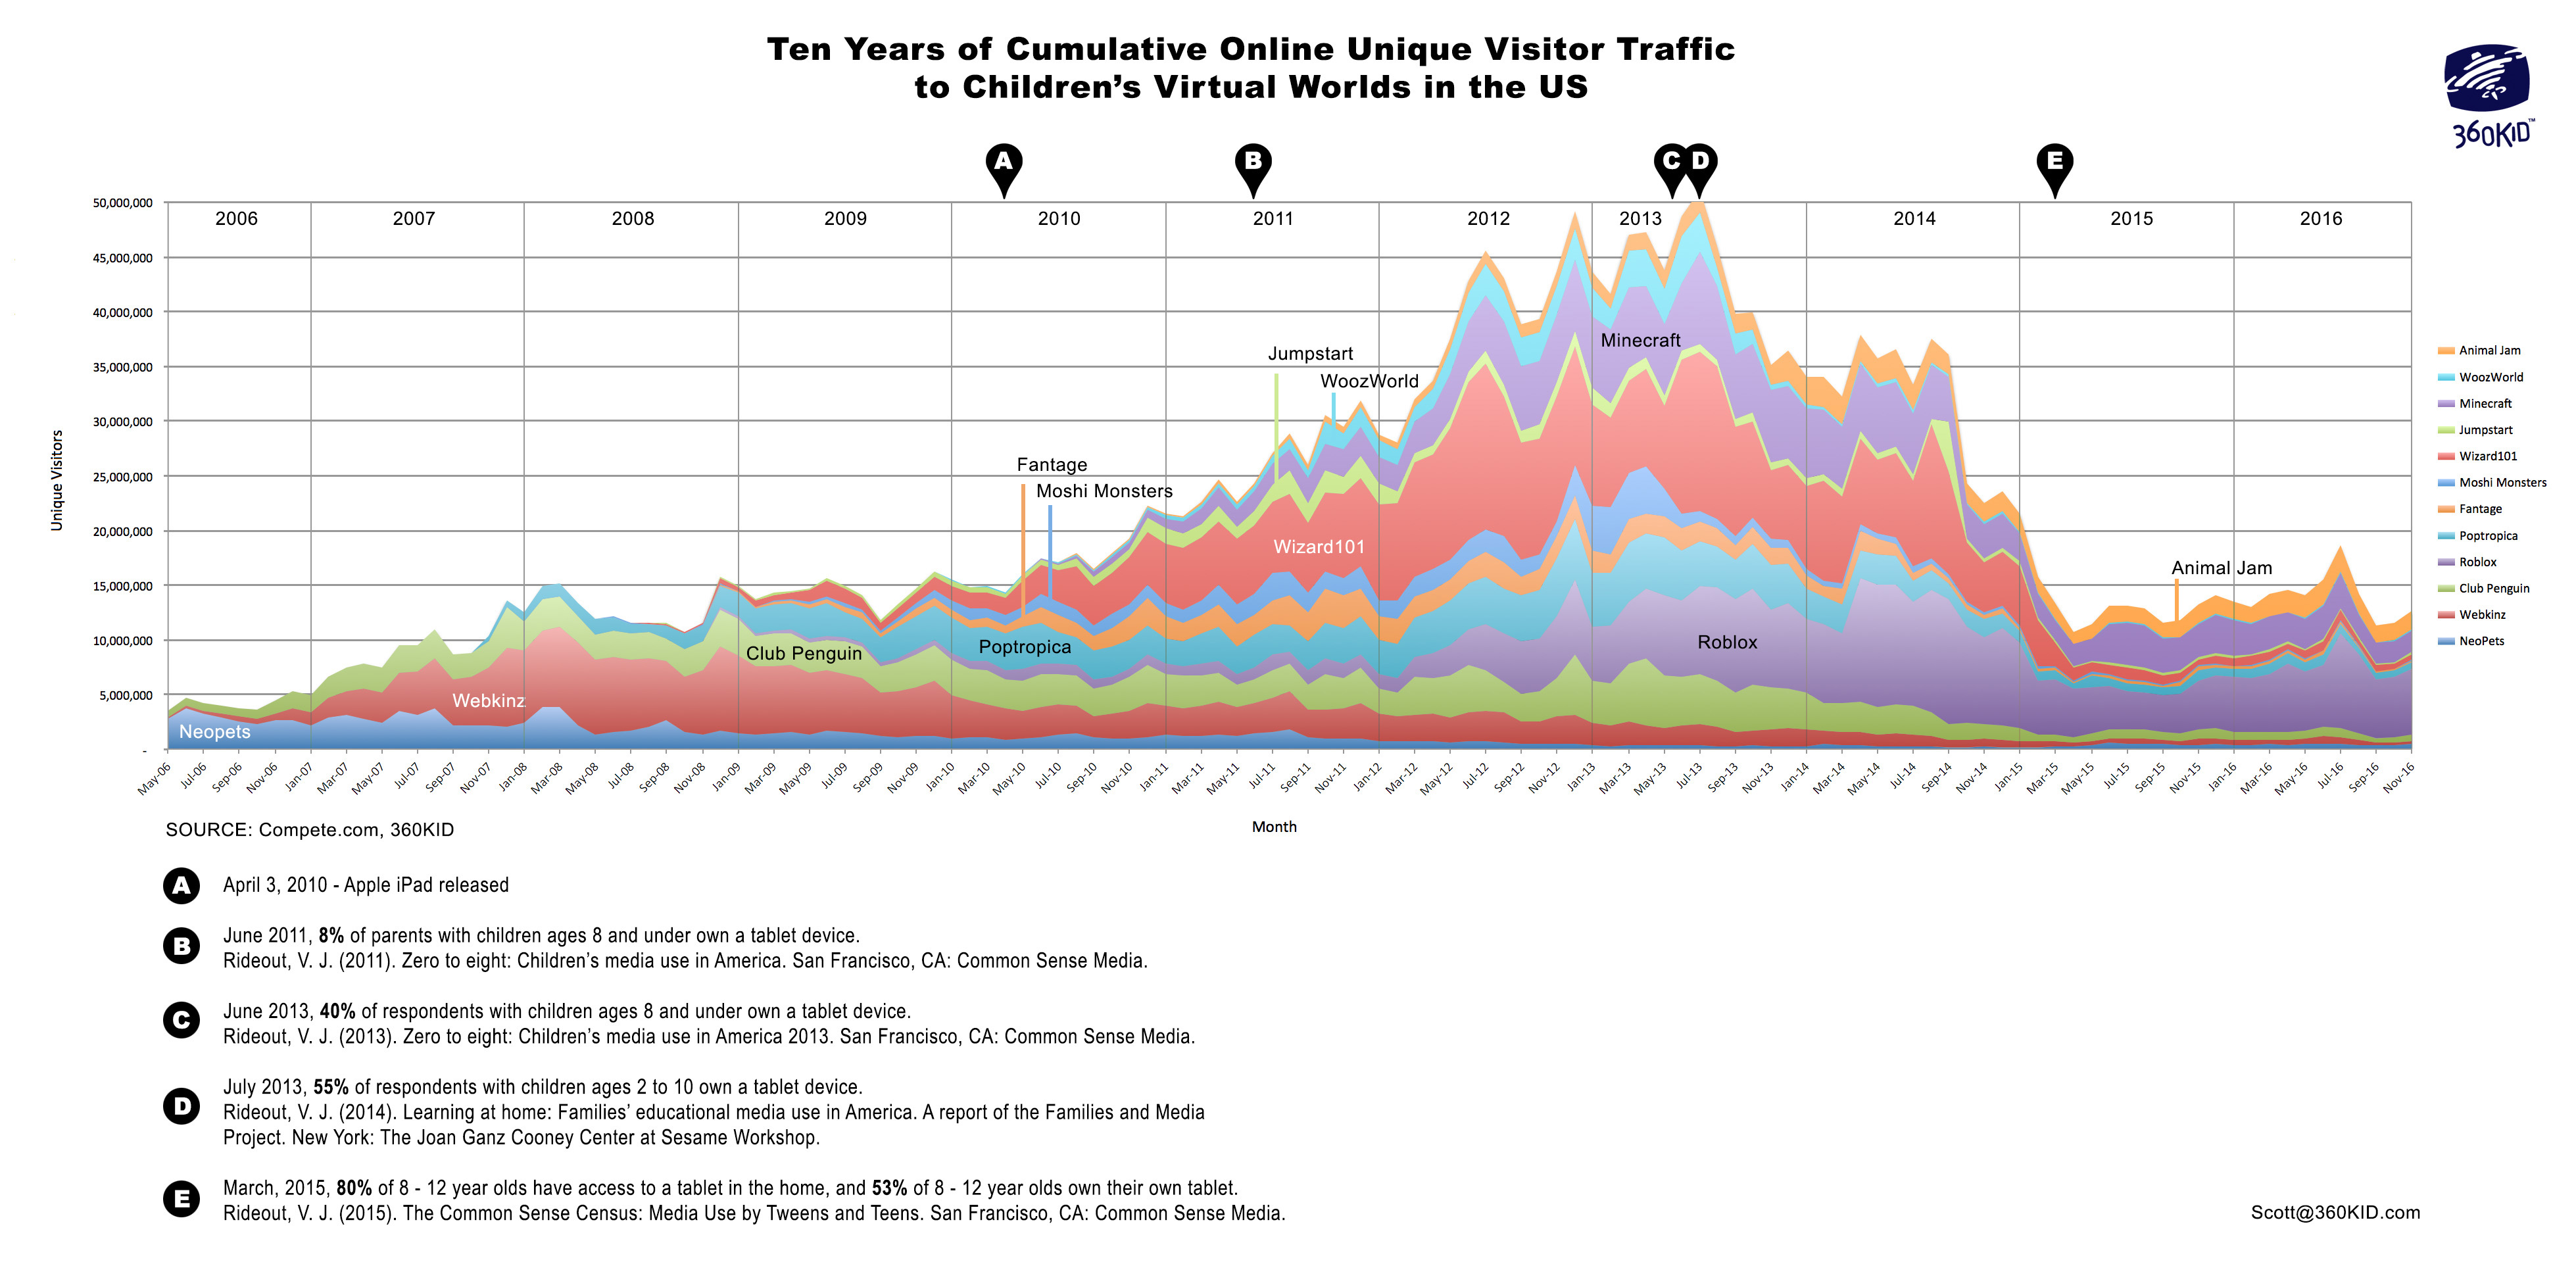 10 years of cumulative online uniques to children's virtual worlds in the US.